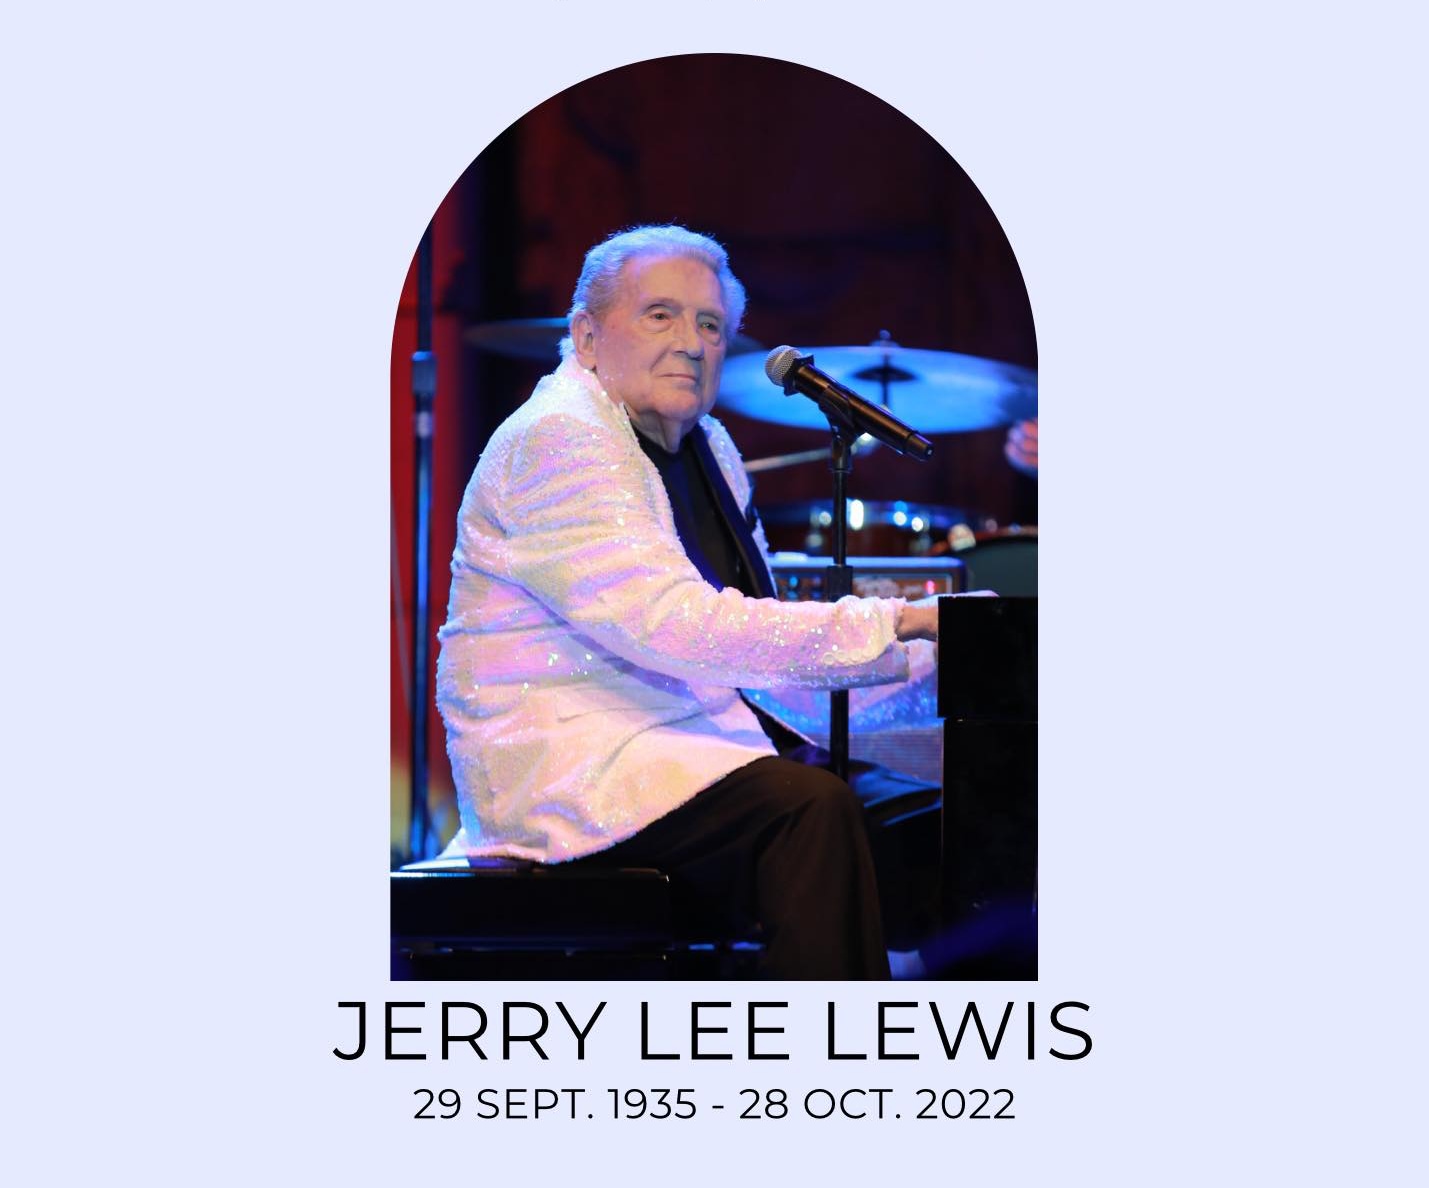 Jerry Lee Lewis Funeral Details Announced - 117 Entertainment Group